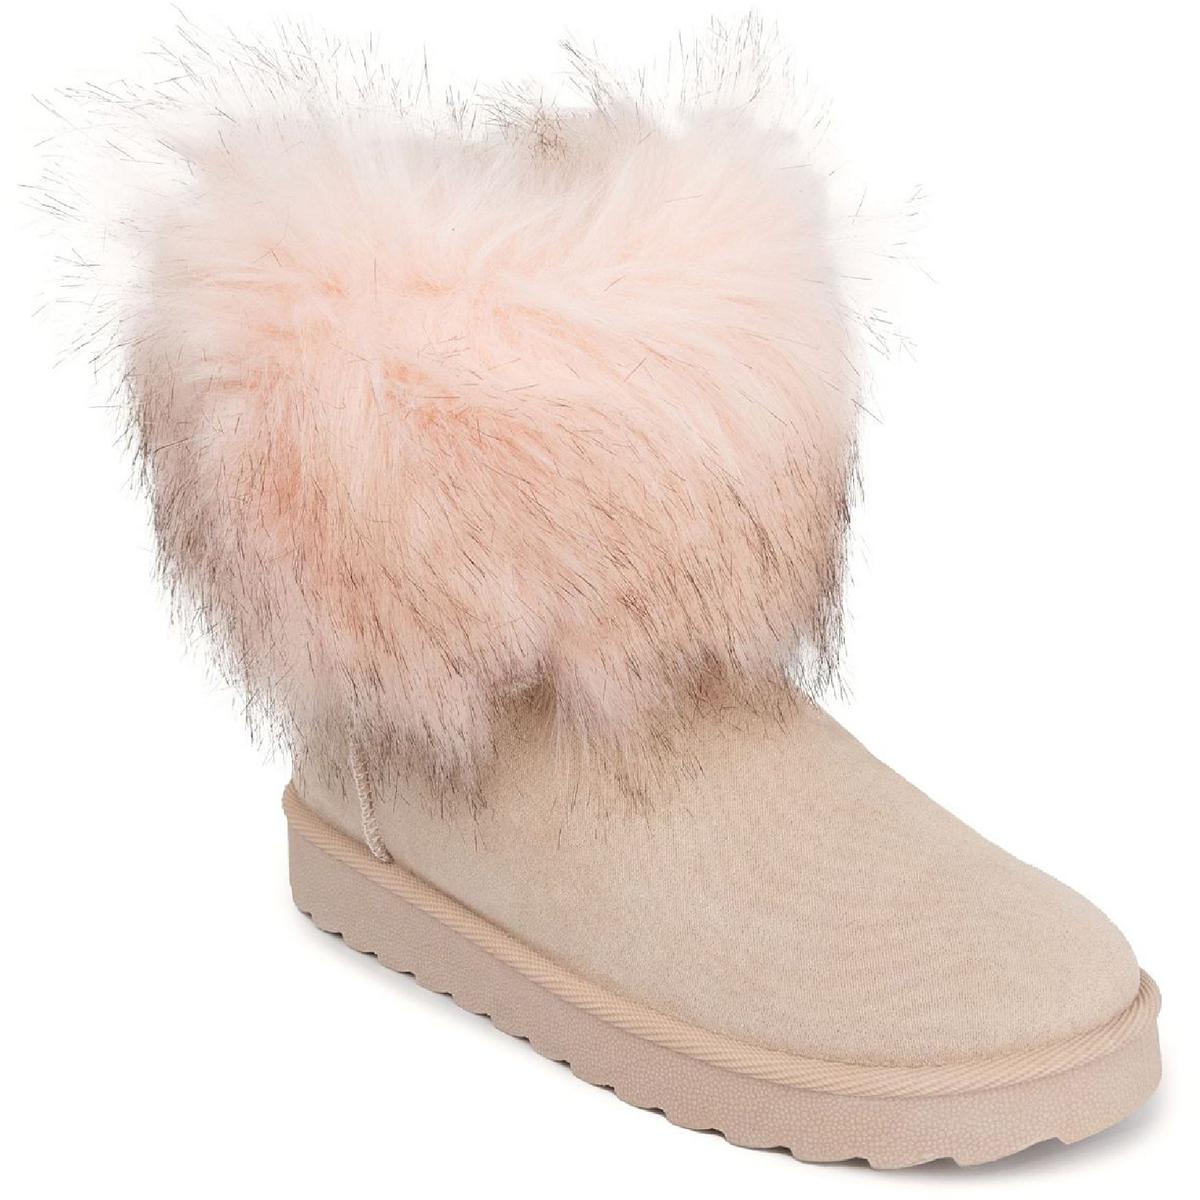 Selected Color is Blush Micro/Fur